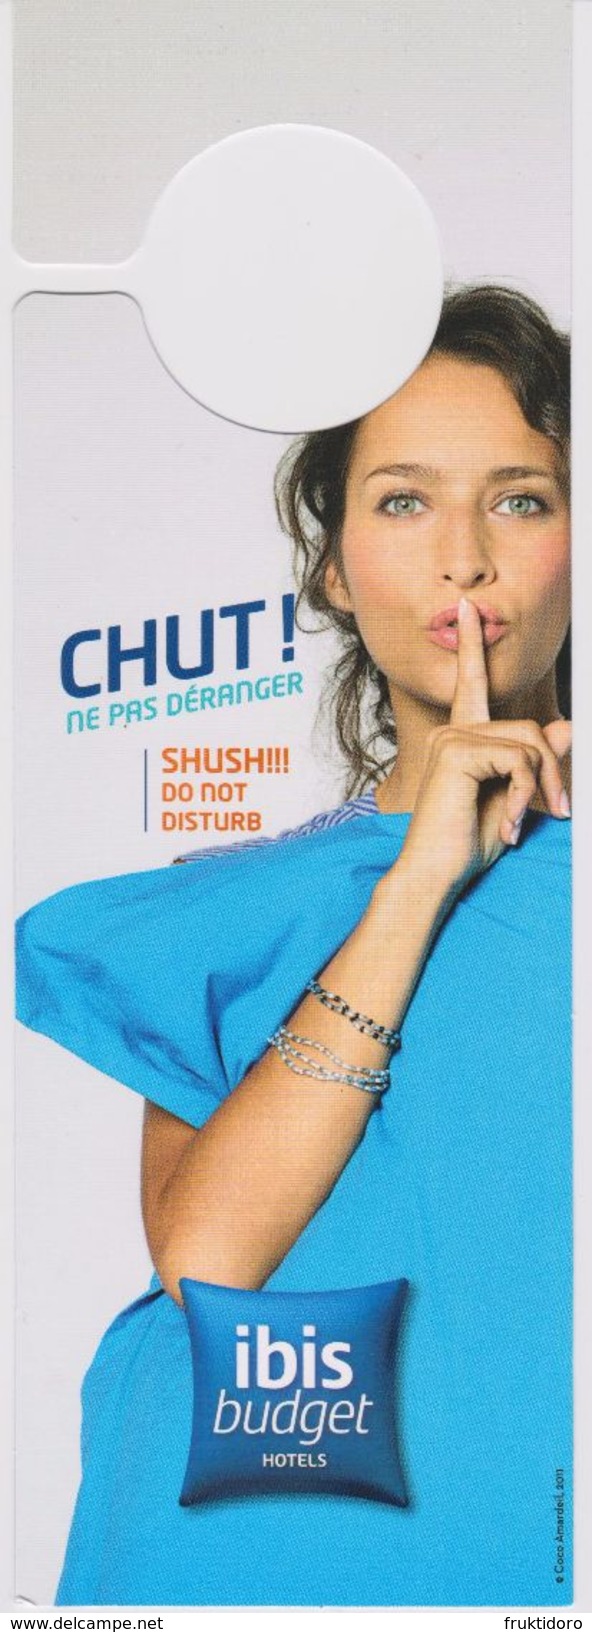 Do Not Disturb Sign From Hotel Ibis Budget - Text In French And English - Etiketten Van Hotels